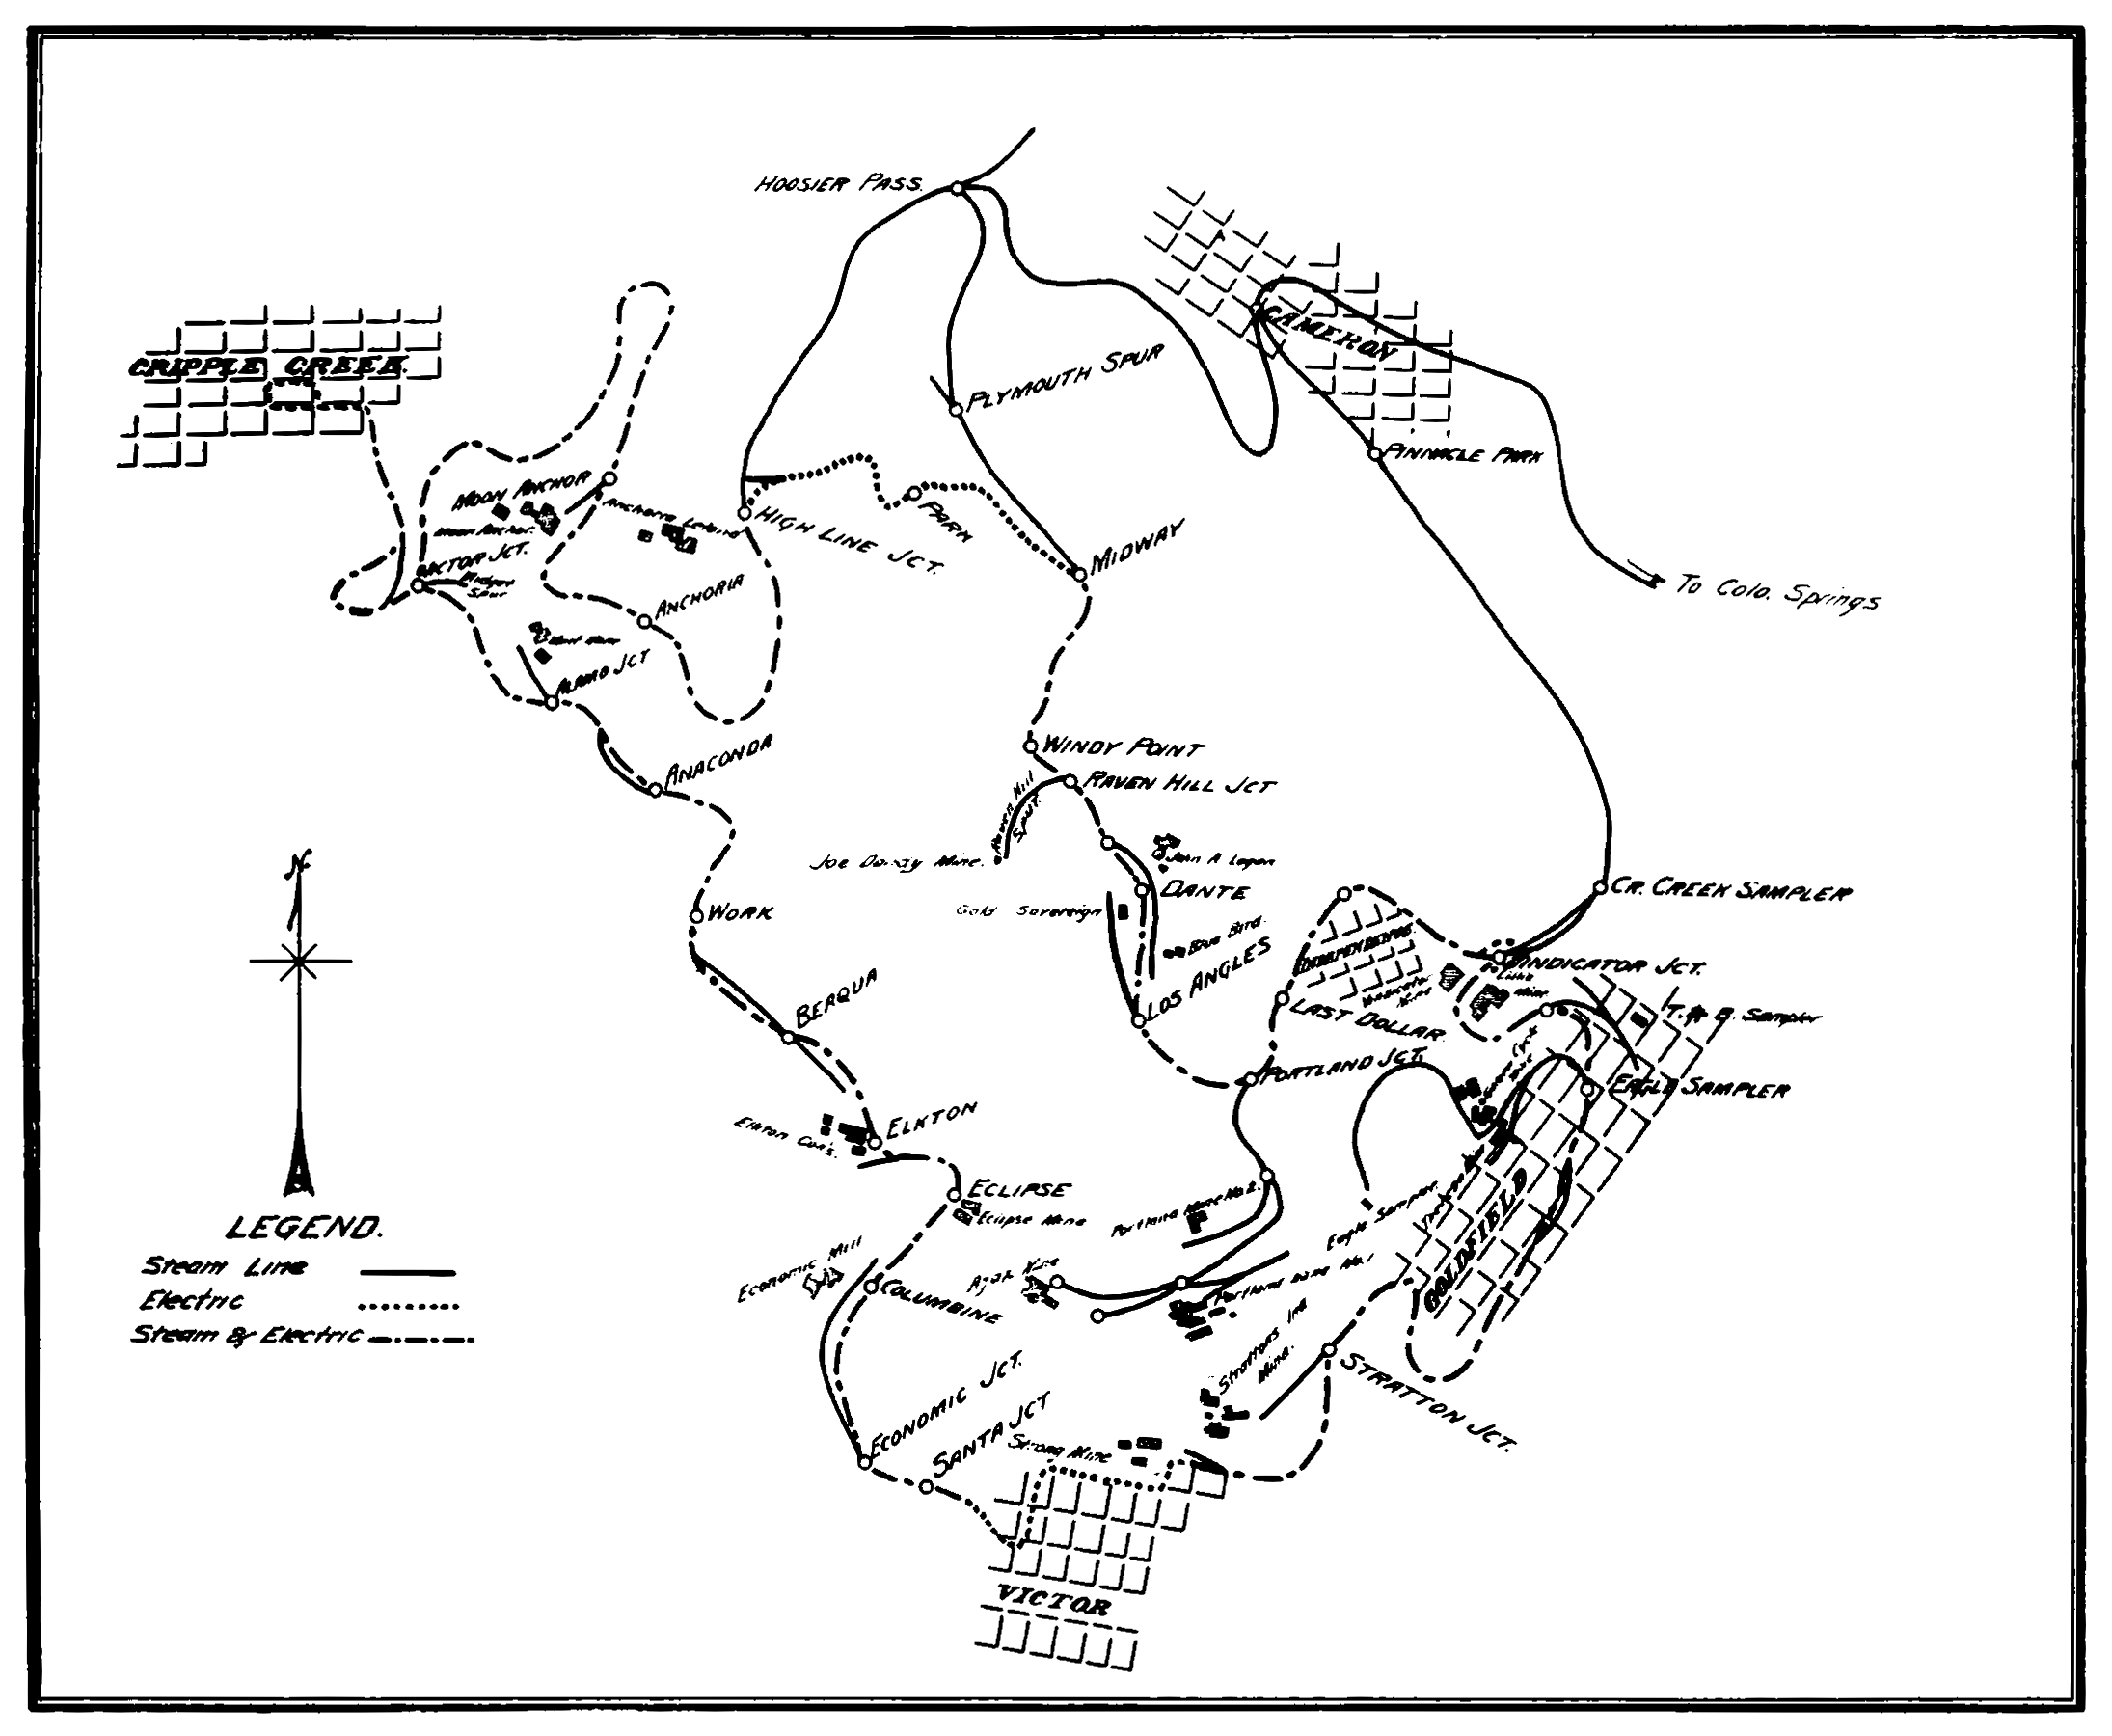 District Map of the Colorado Springs & Cripple Creek District Railway—Steam, Electric and Joint Lines.